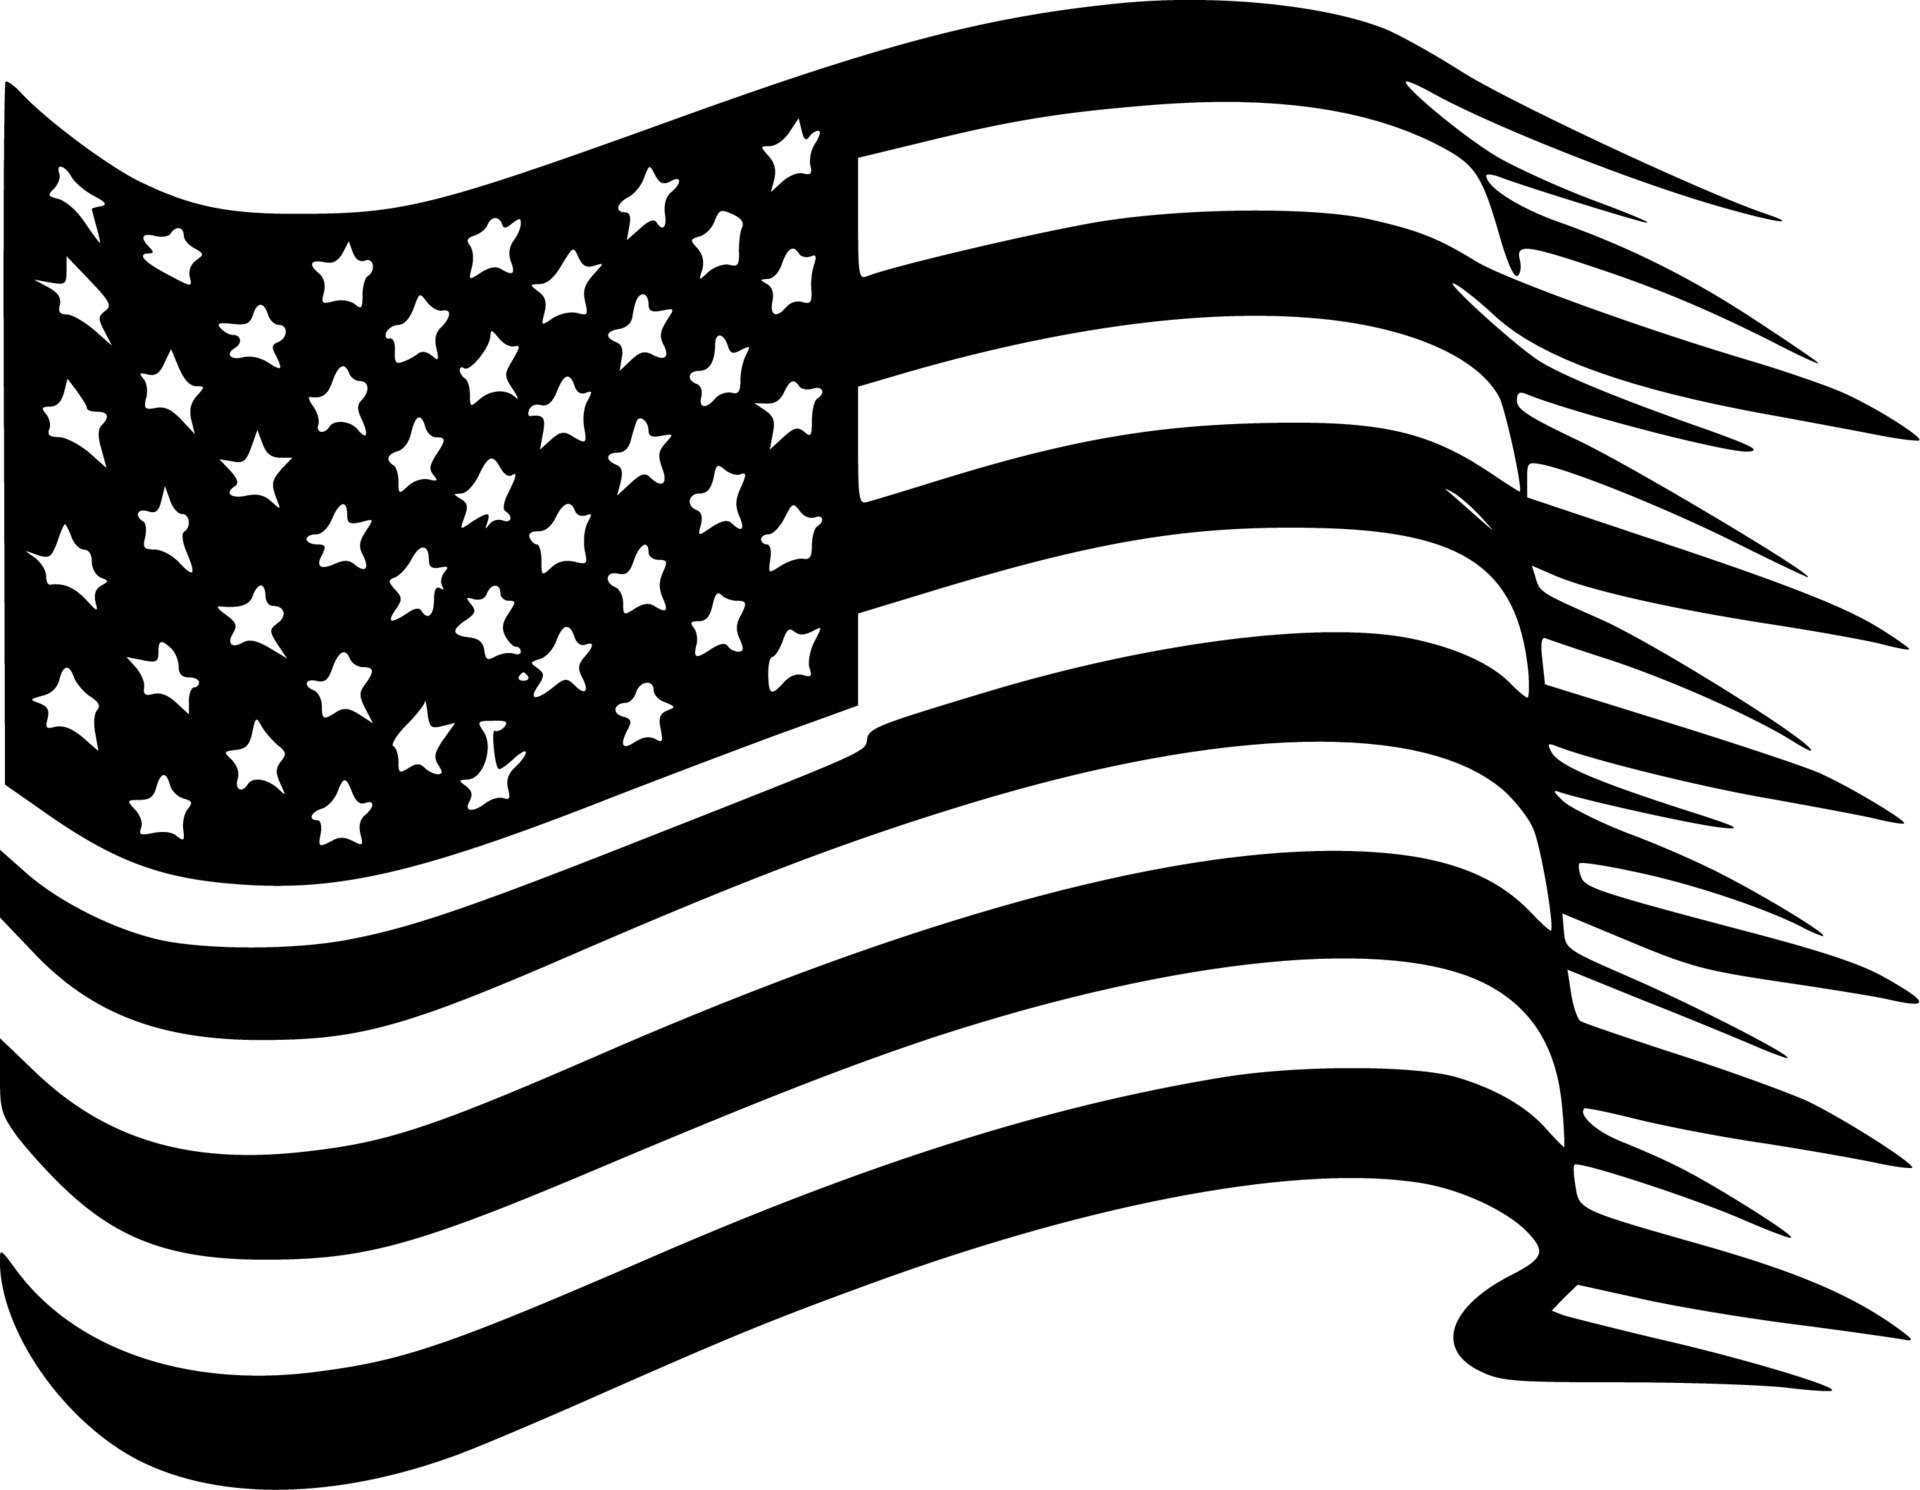 American Flag - Black and White Isolated Icon - Vector illustration ...